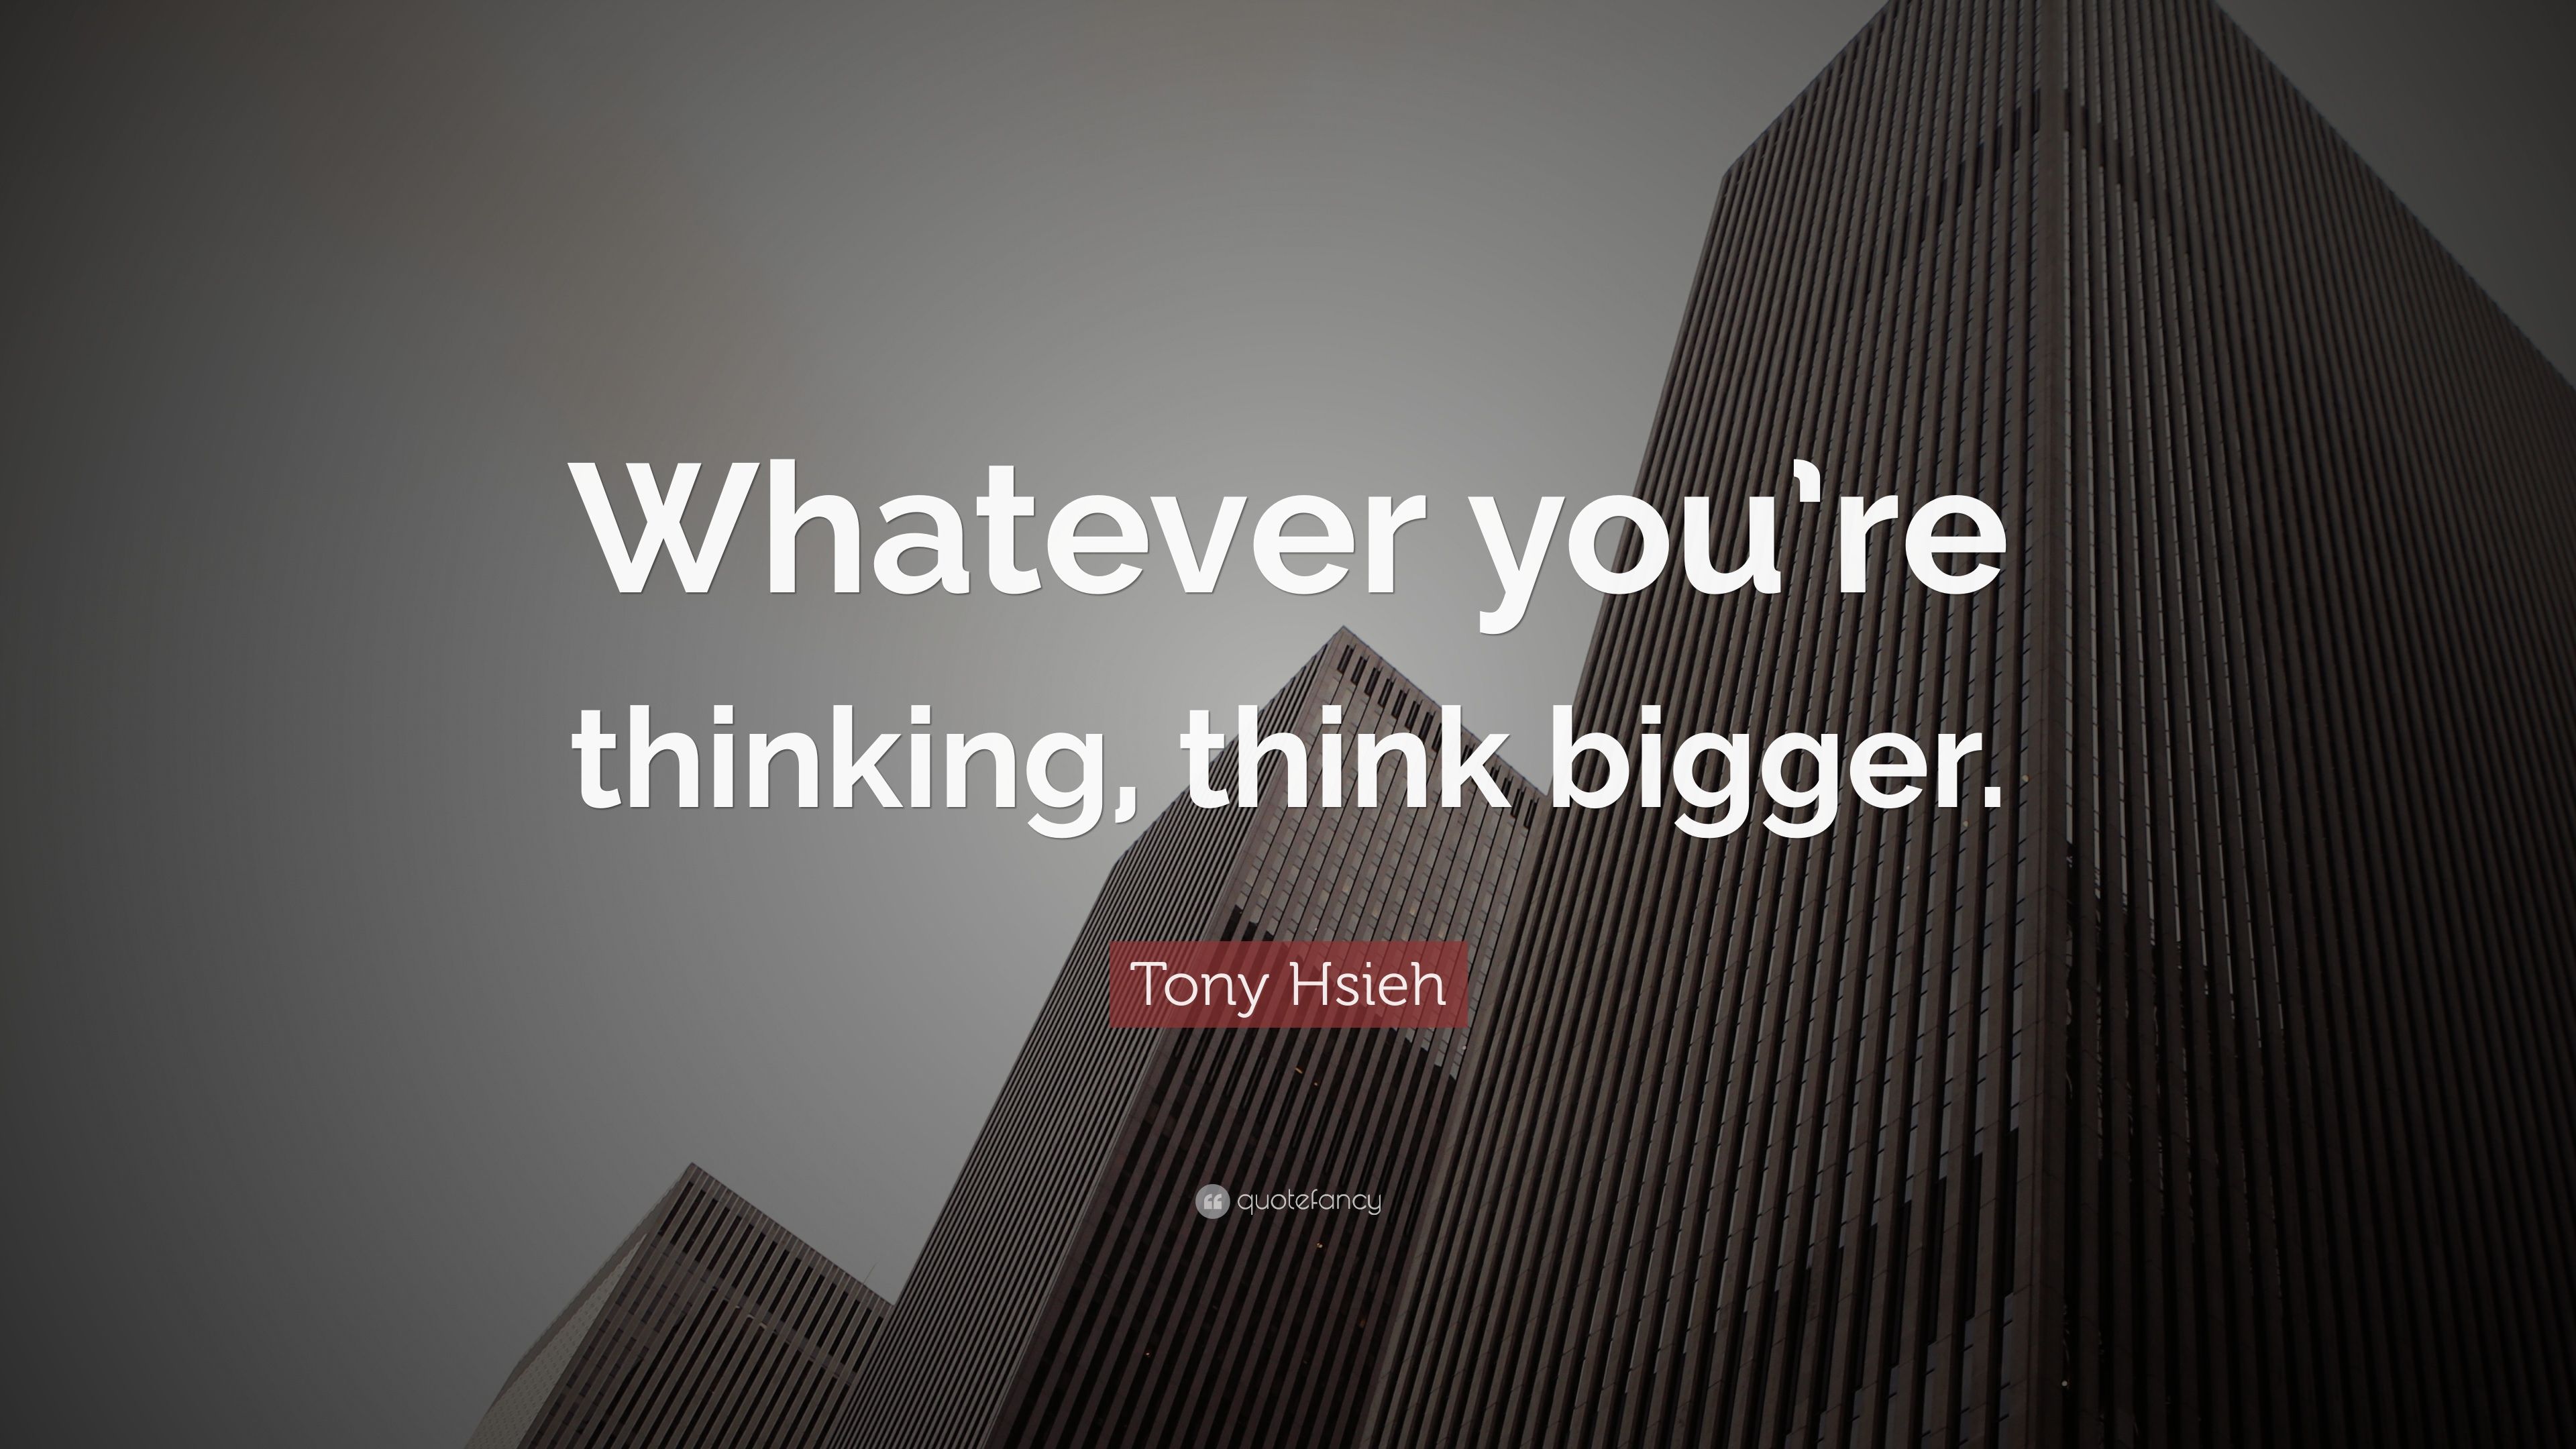 Tony Hsieh Quote: “Whatever you're thinking, think bigger.” (14 ...